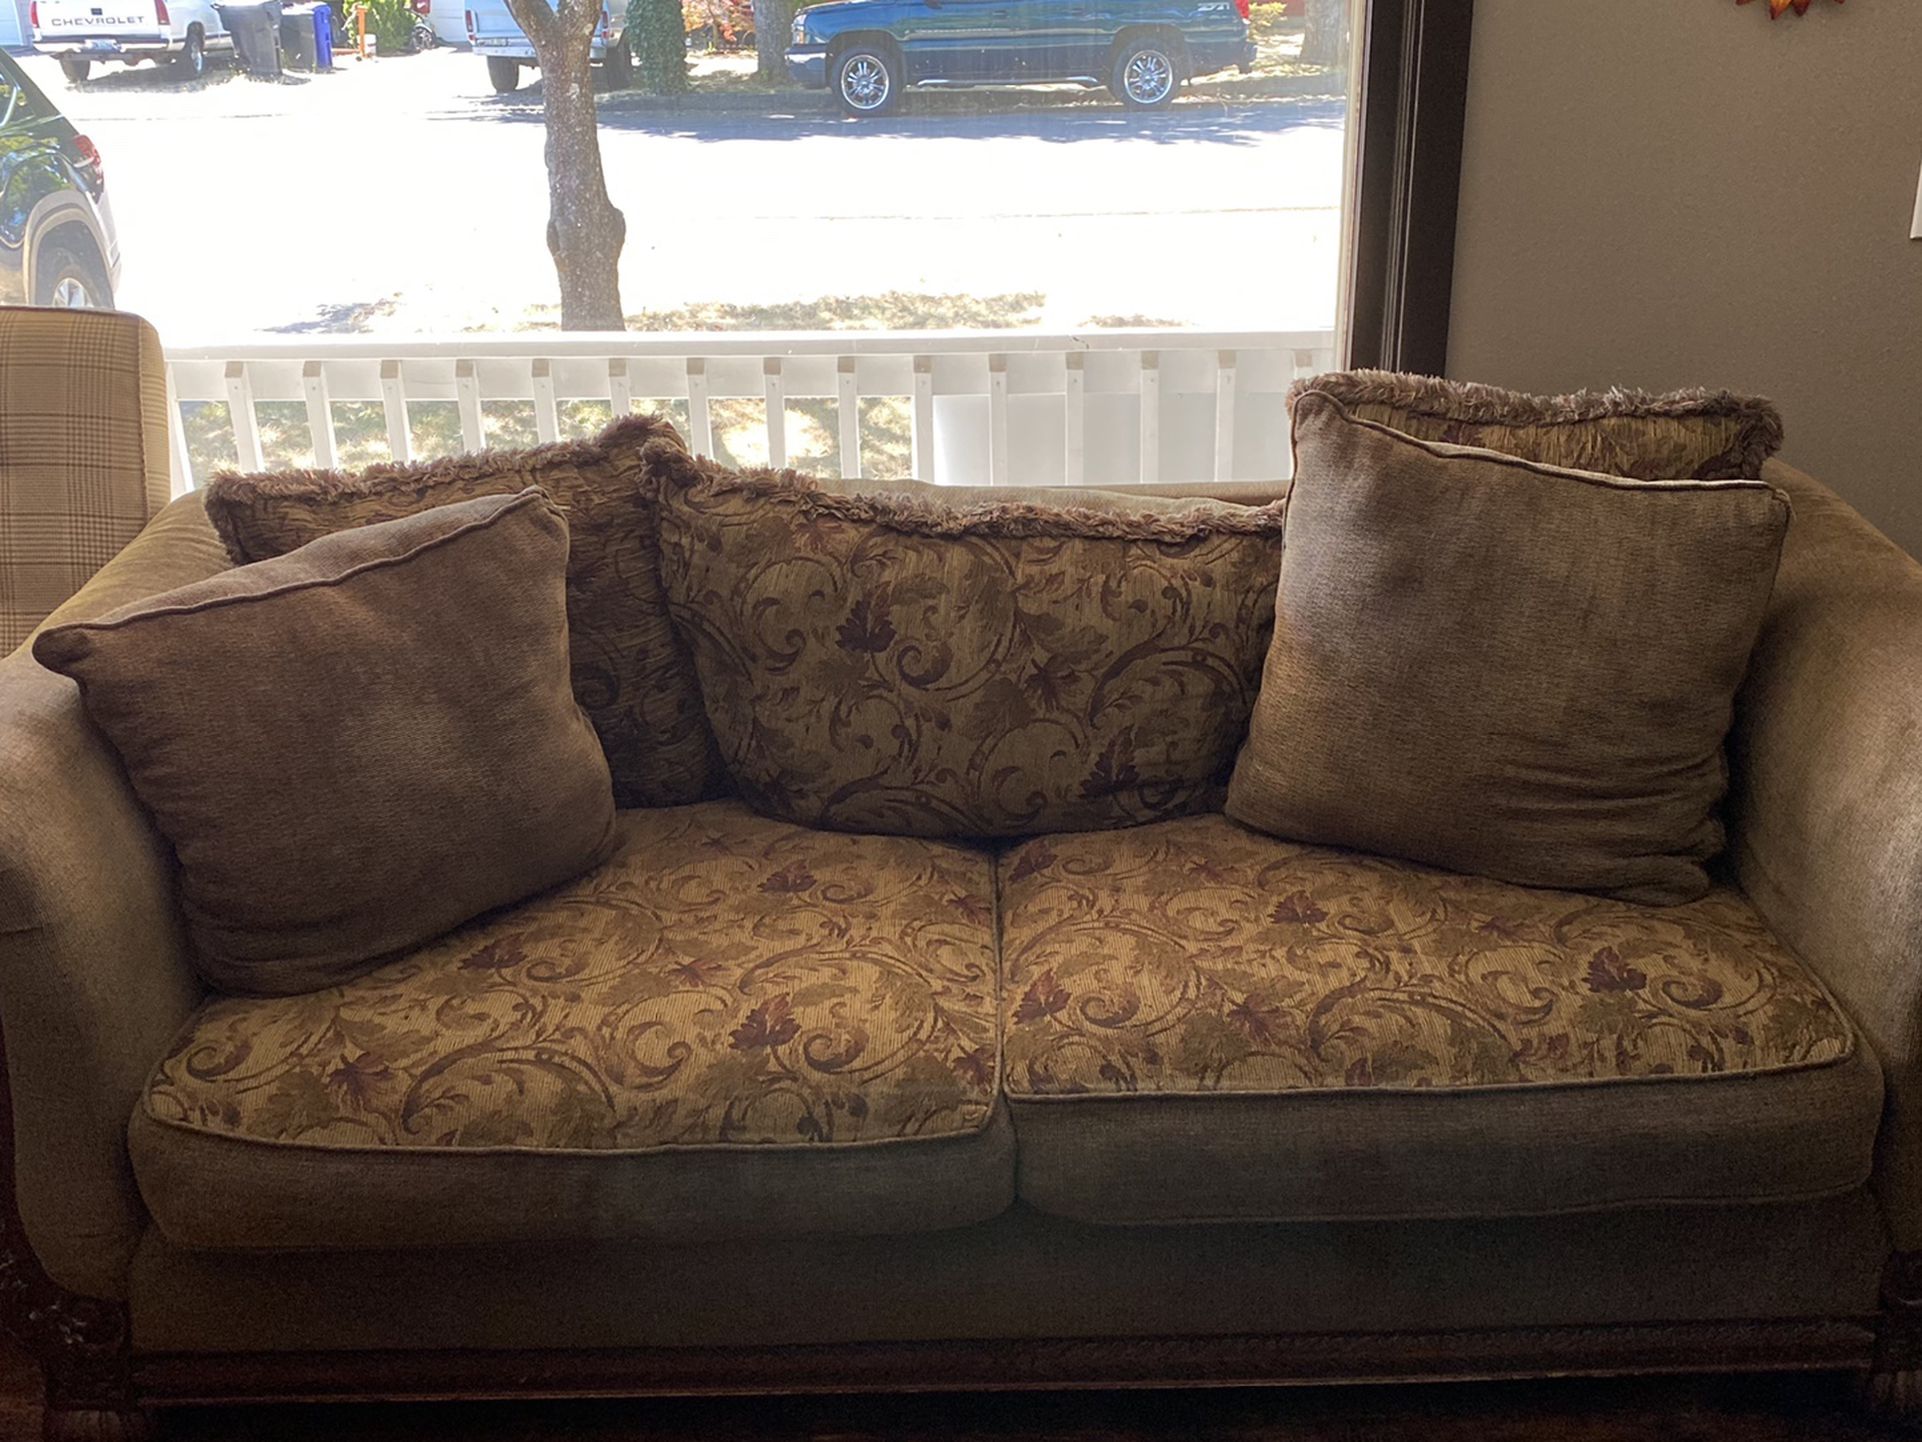 Sofa, Clubchair/ Ottoman, And Wingback Chairs